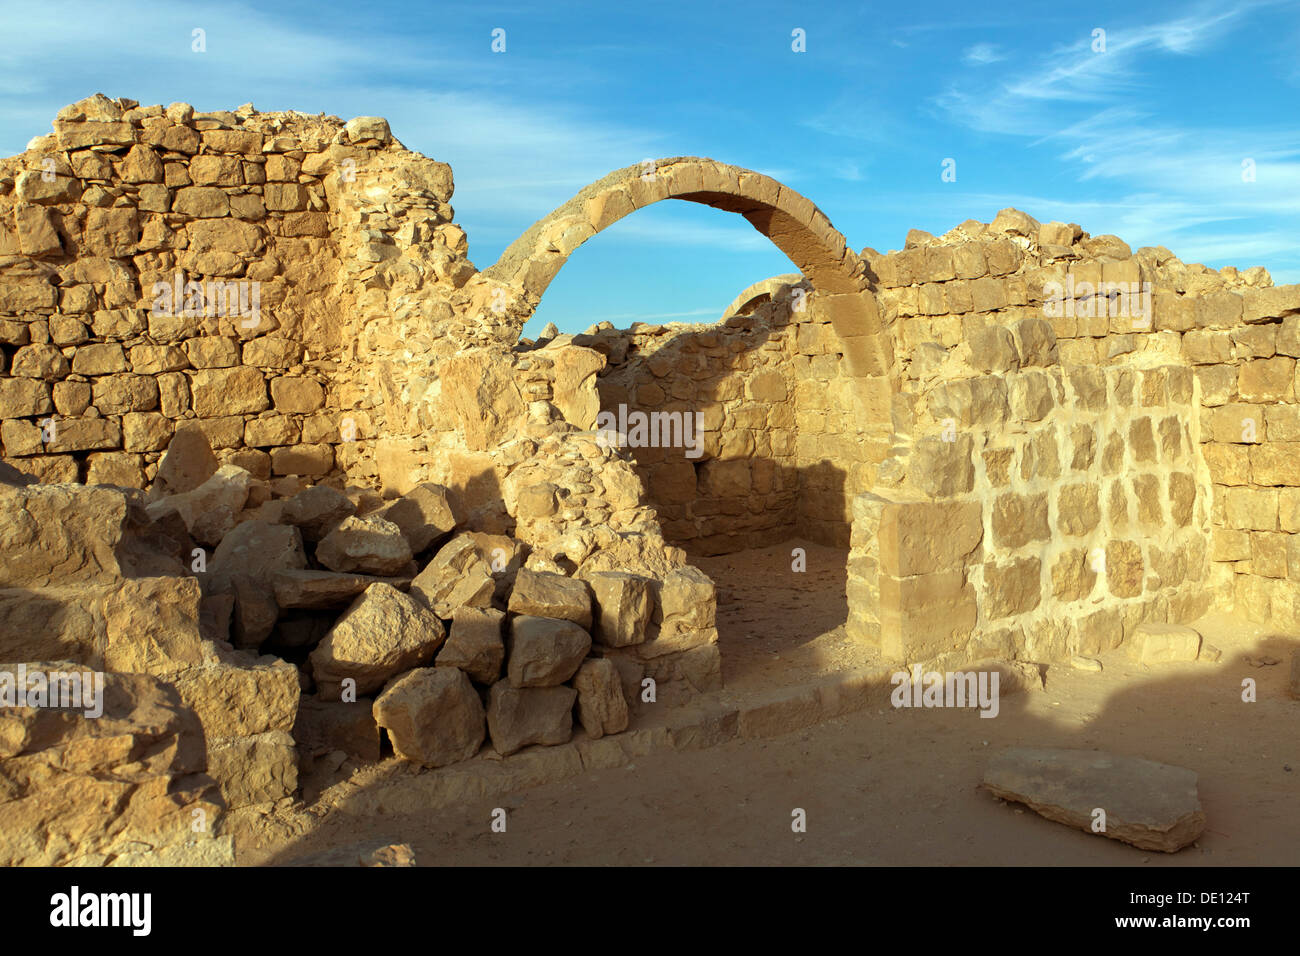 Israel, Northern Negev Mountain. Ruins of Shivta, built in the 1st century by the Nabateans. Stock Photo